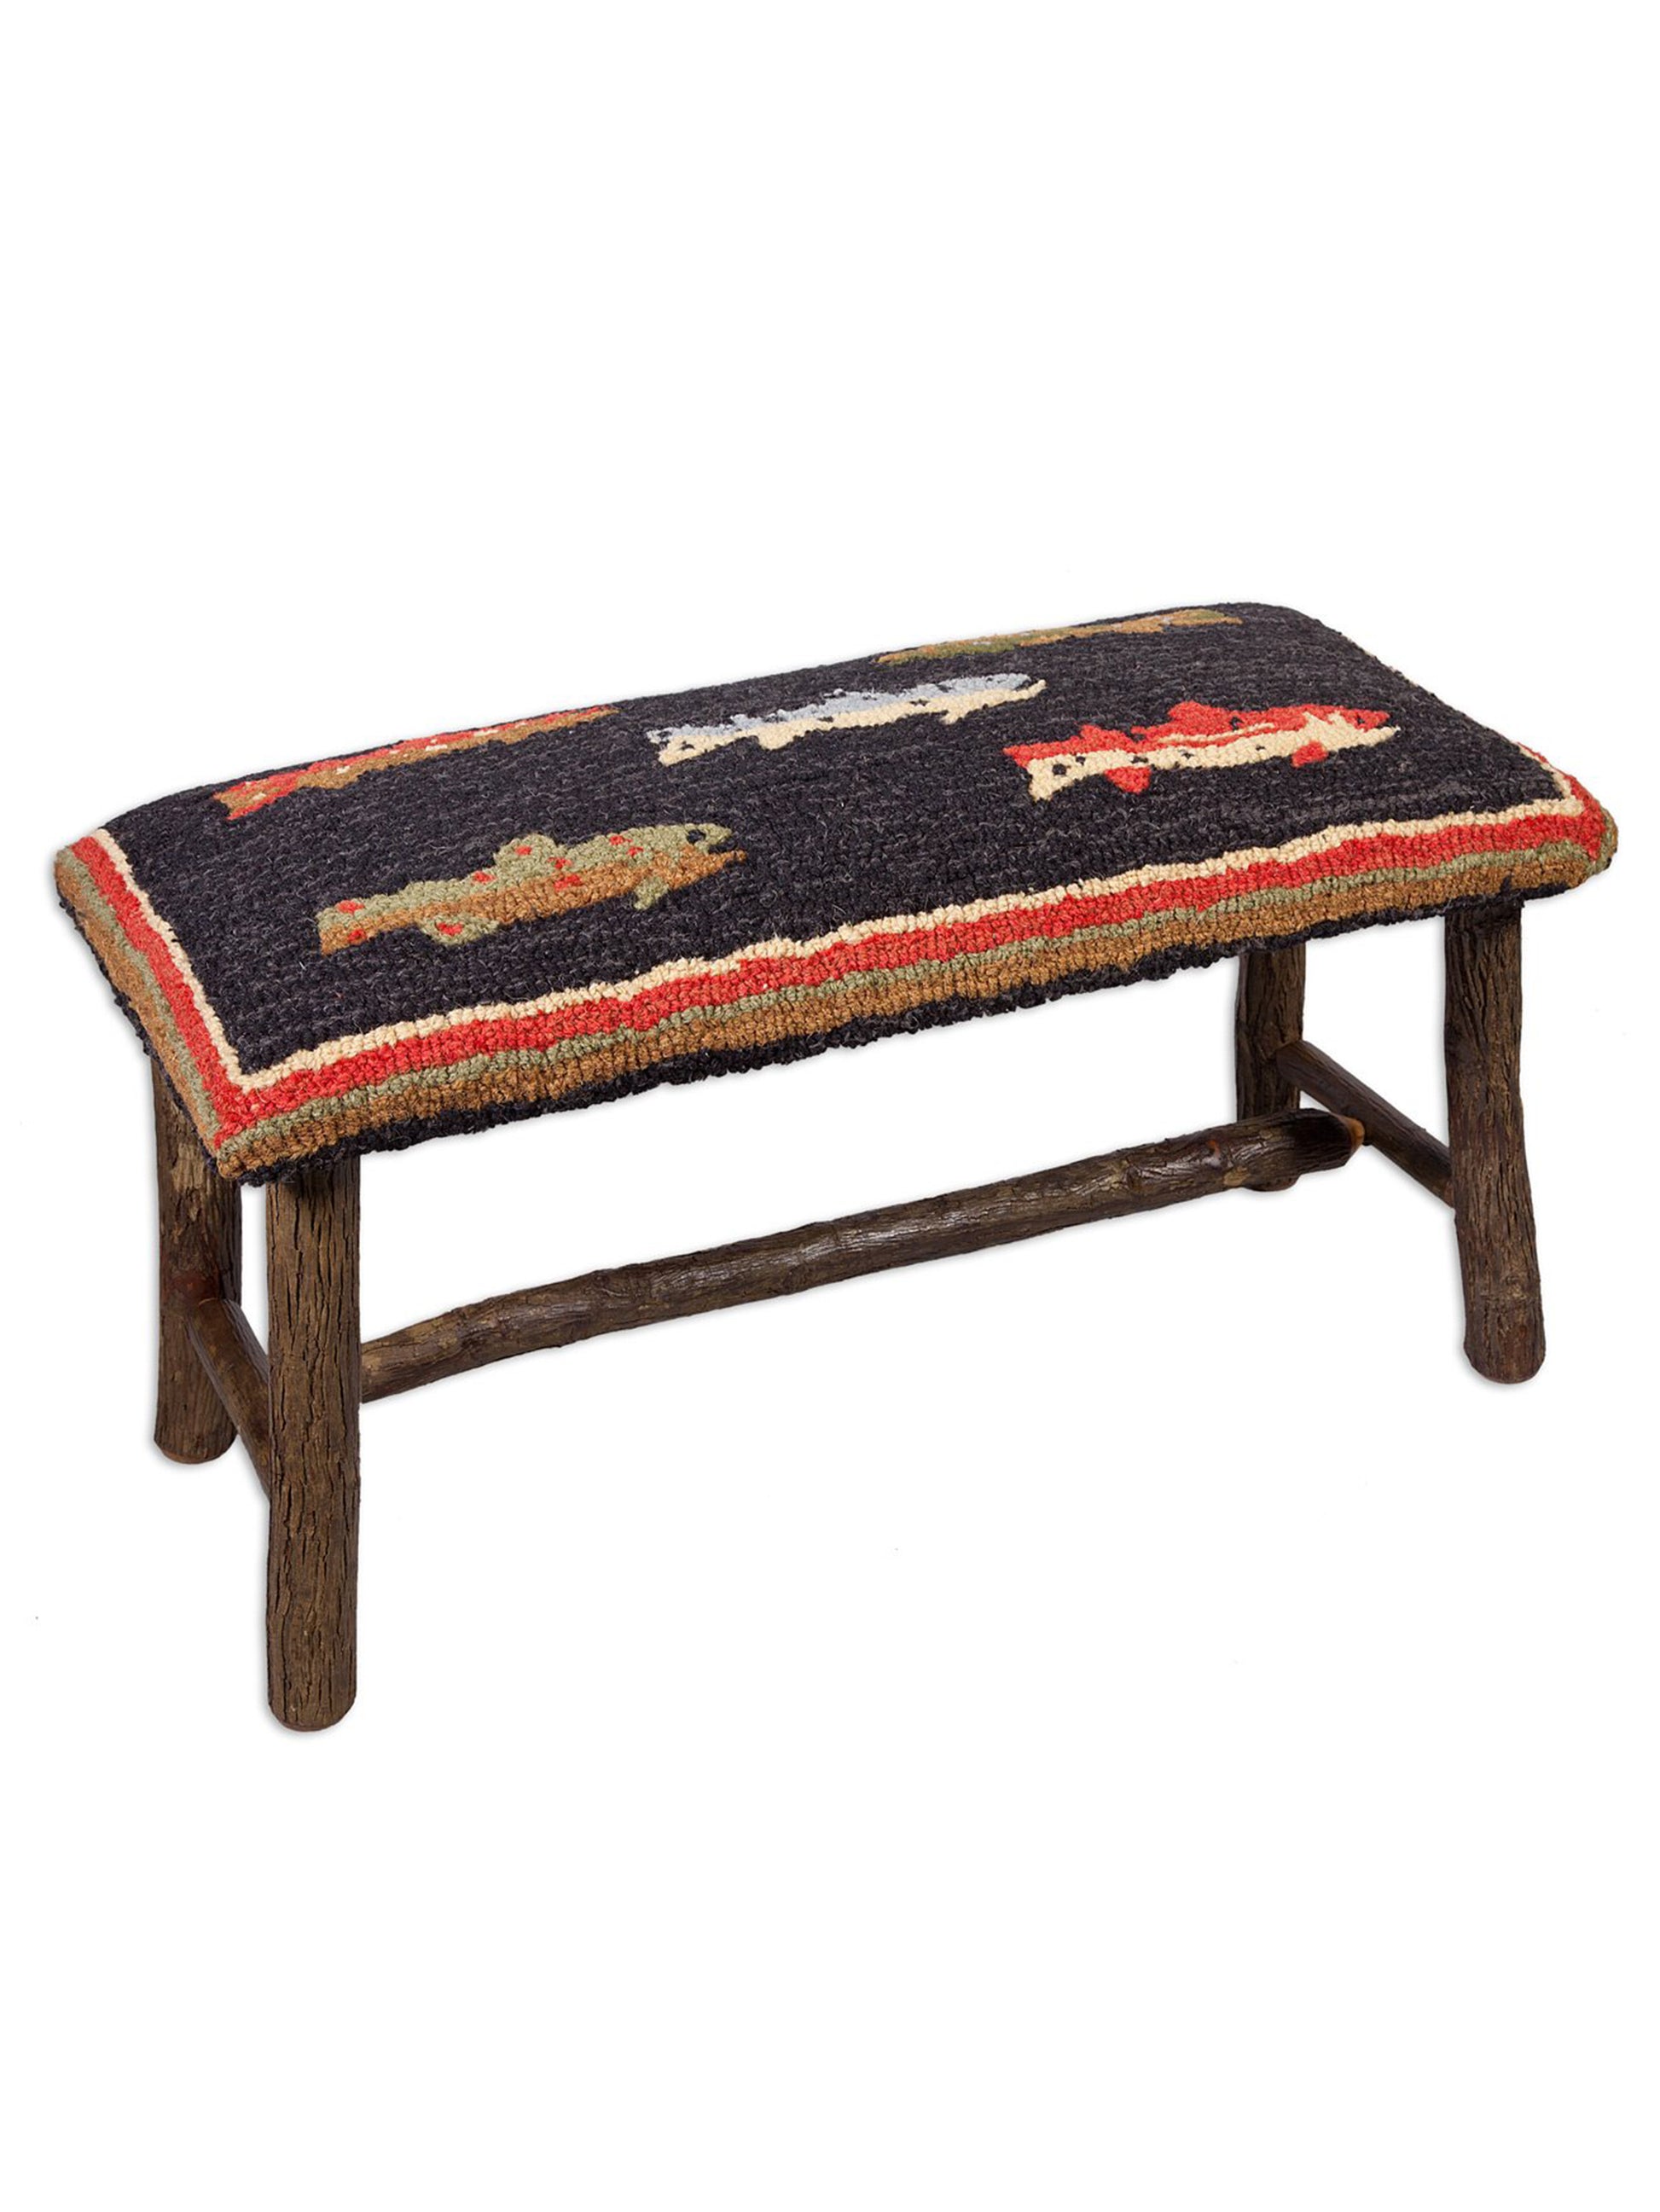 River Fish Hooked Wool Top Bench 15" x 32" Weston Table